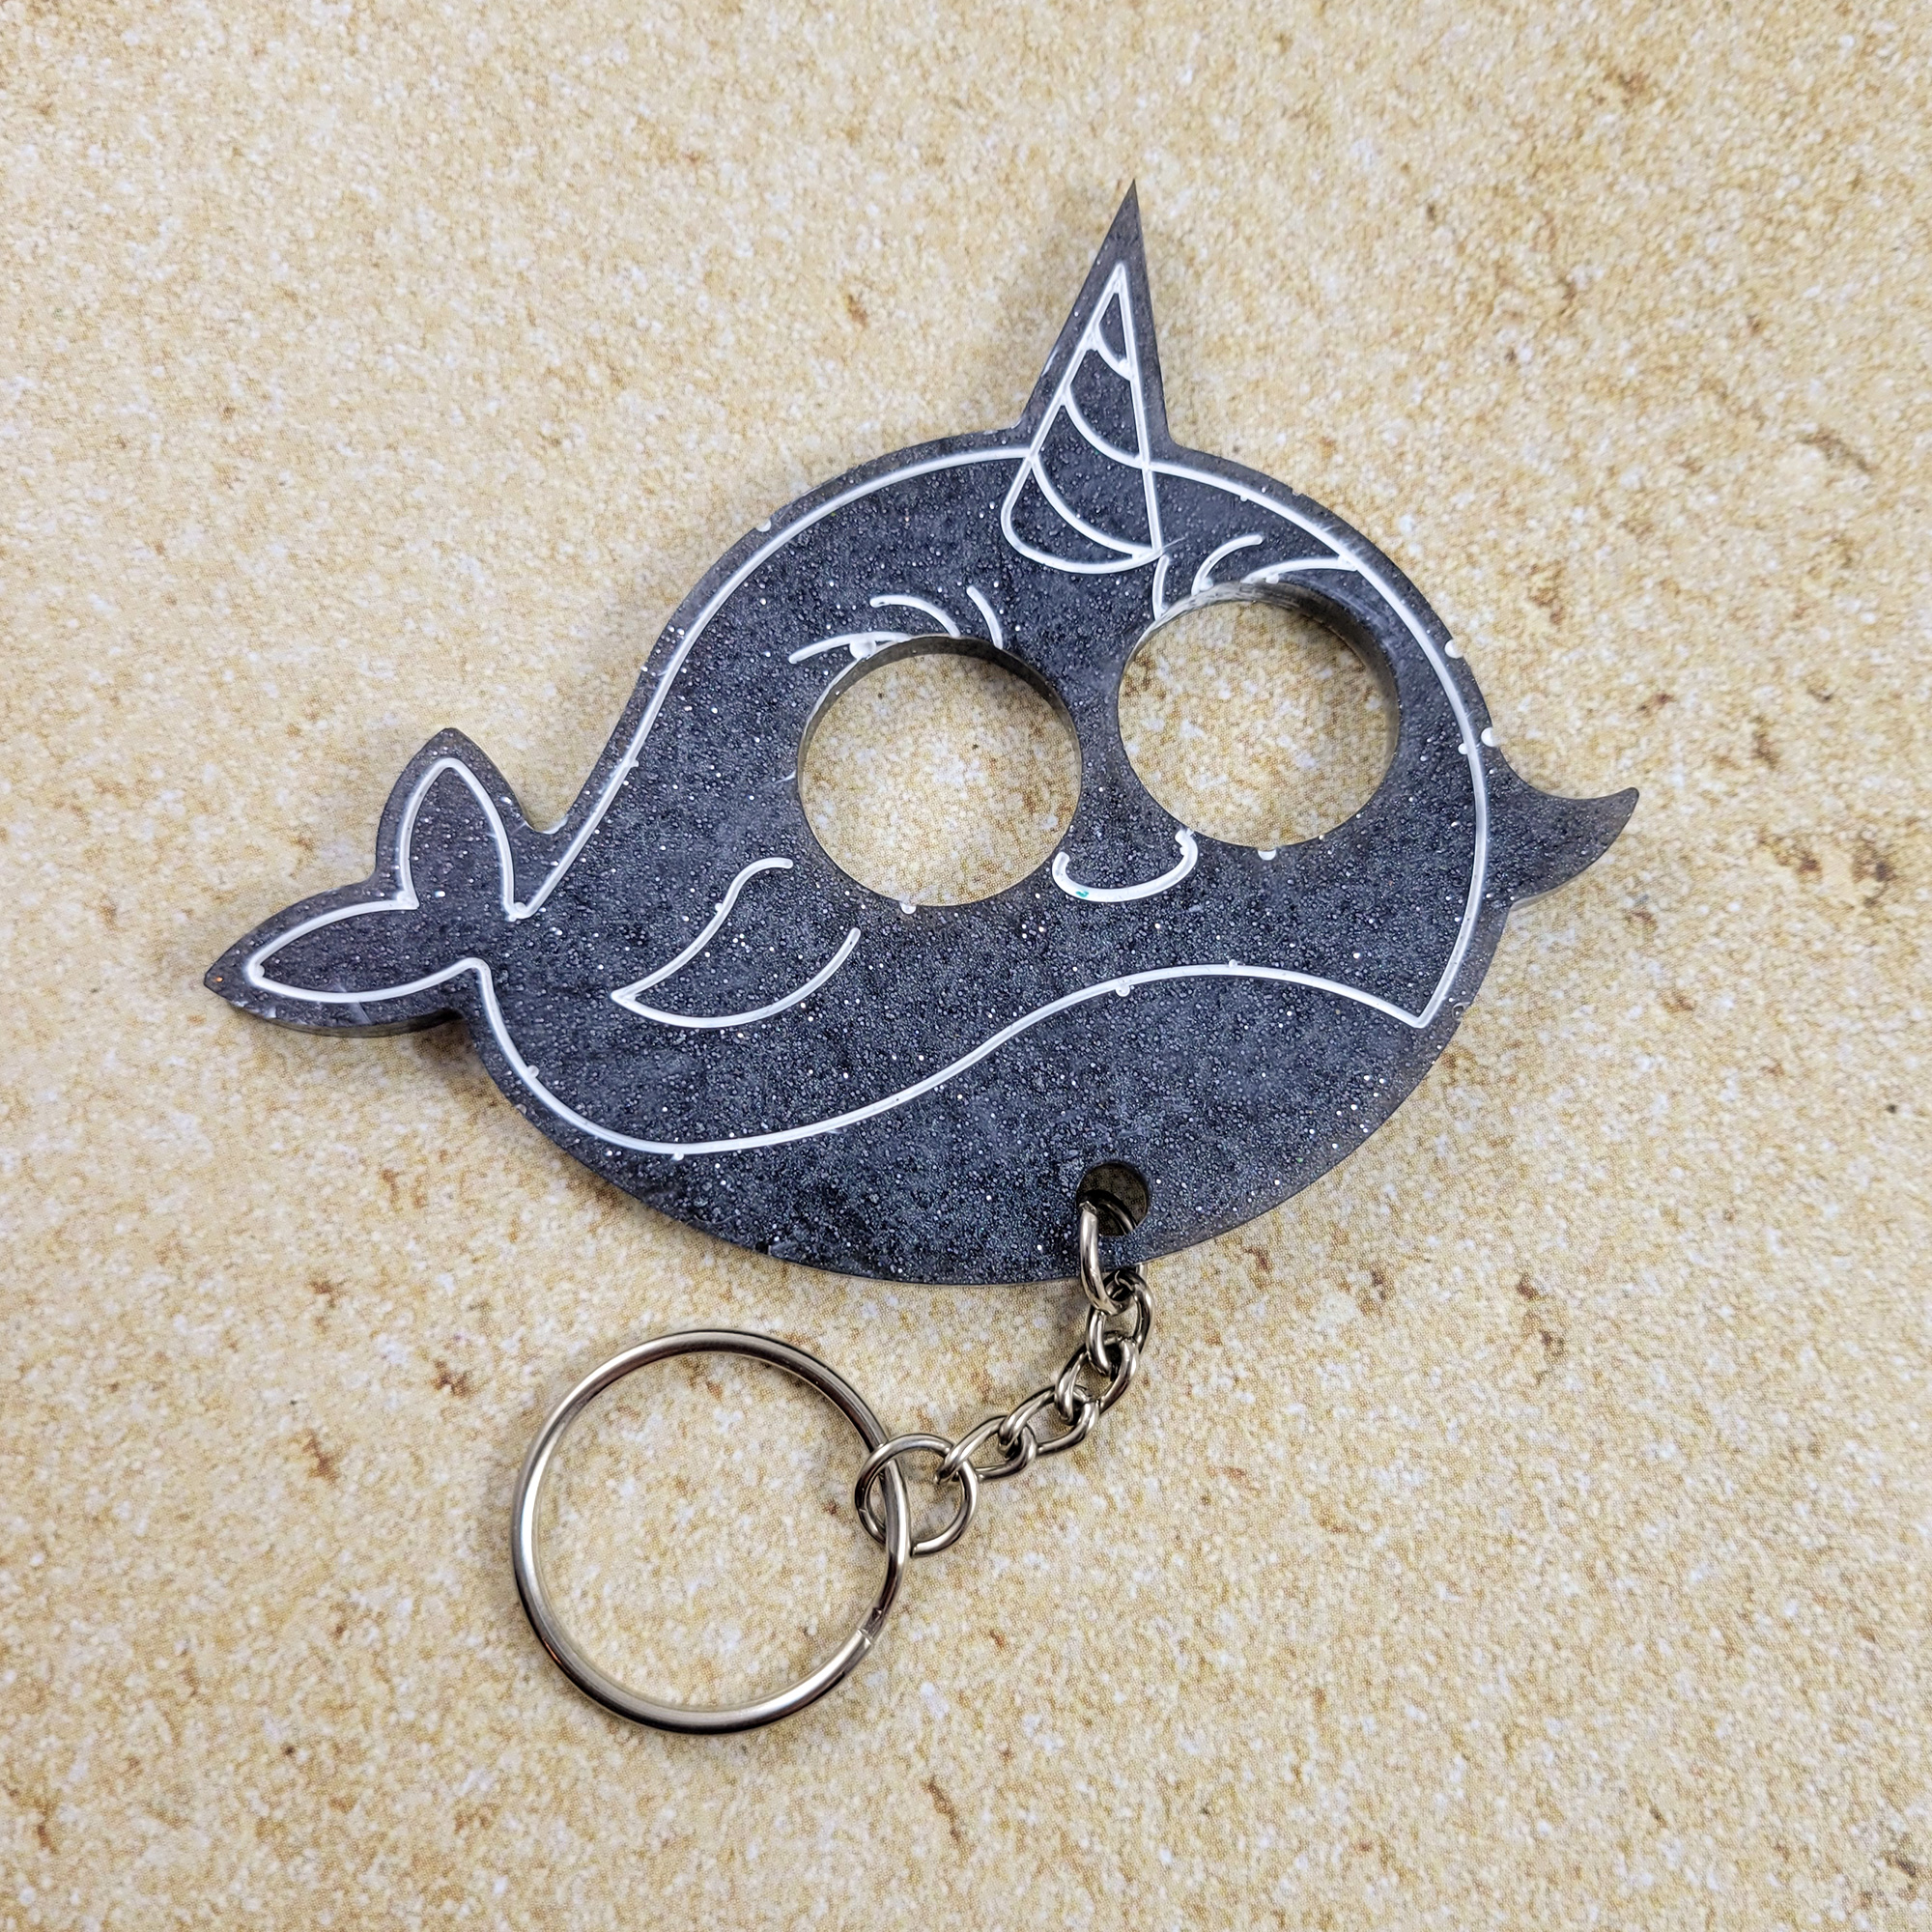 Narwhal Safety Keychain by Wilde Designs